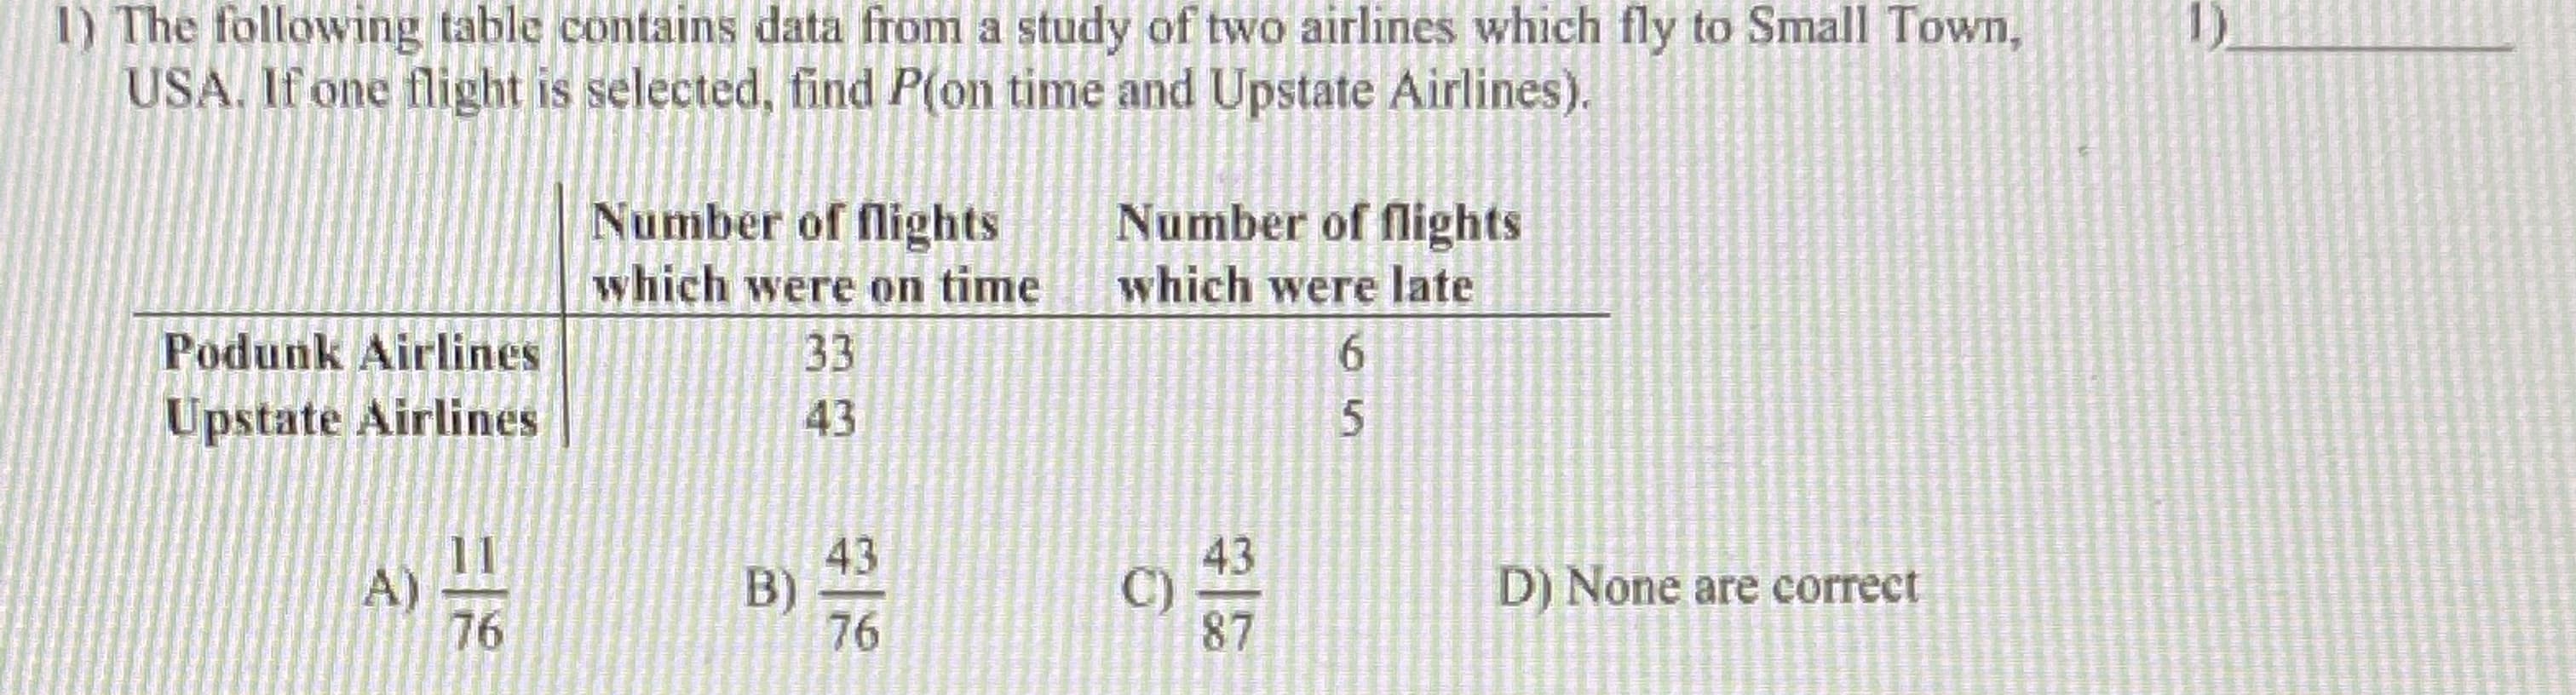 The following täble contains data from a study of two airlines which fly to Small Town,
USA. If one flight is selected, find P(on time and Upstate Airlines).
Number of flights
Number of flights
which were on time which were late
33
43
Podunk Airlines
61
Upstate Airlines
A)
76
11
43
B)
C)
43
D) None are correct
87
76
B)
